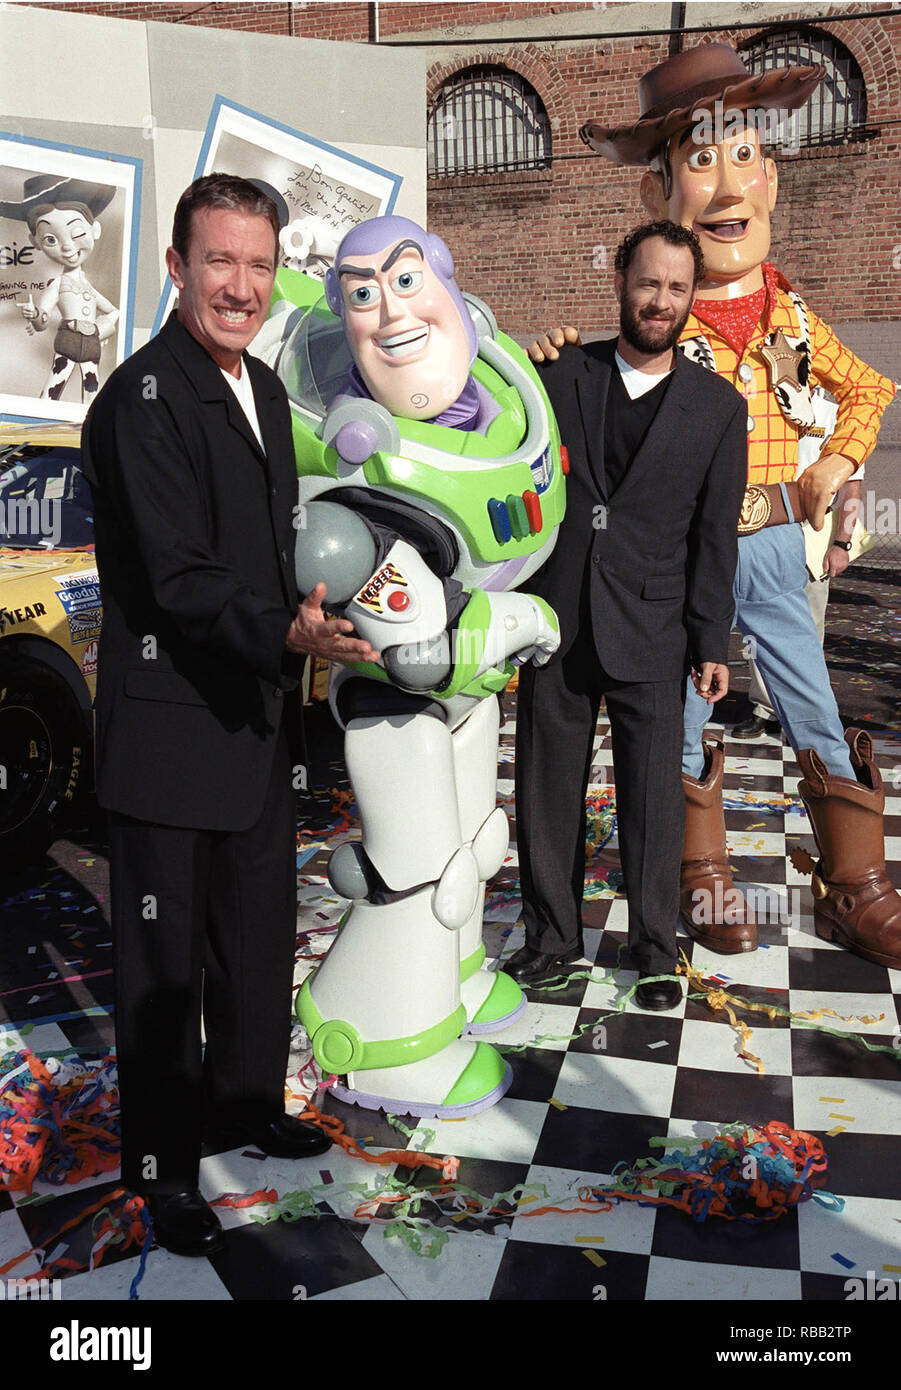 23OCT99: Actors TIM ALLEN (left) & TOM HANKS with 'Toy Story' characters 'Buzz Lightyear' & 'Woody' whose voices they portray in the films. They were at a promotion in Hollywood to unveil three NASCAR racing cars themed to 'Toy Story 2' which opens next month.        © RTSmith / MediaPunch Stock Photo